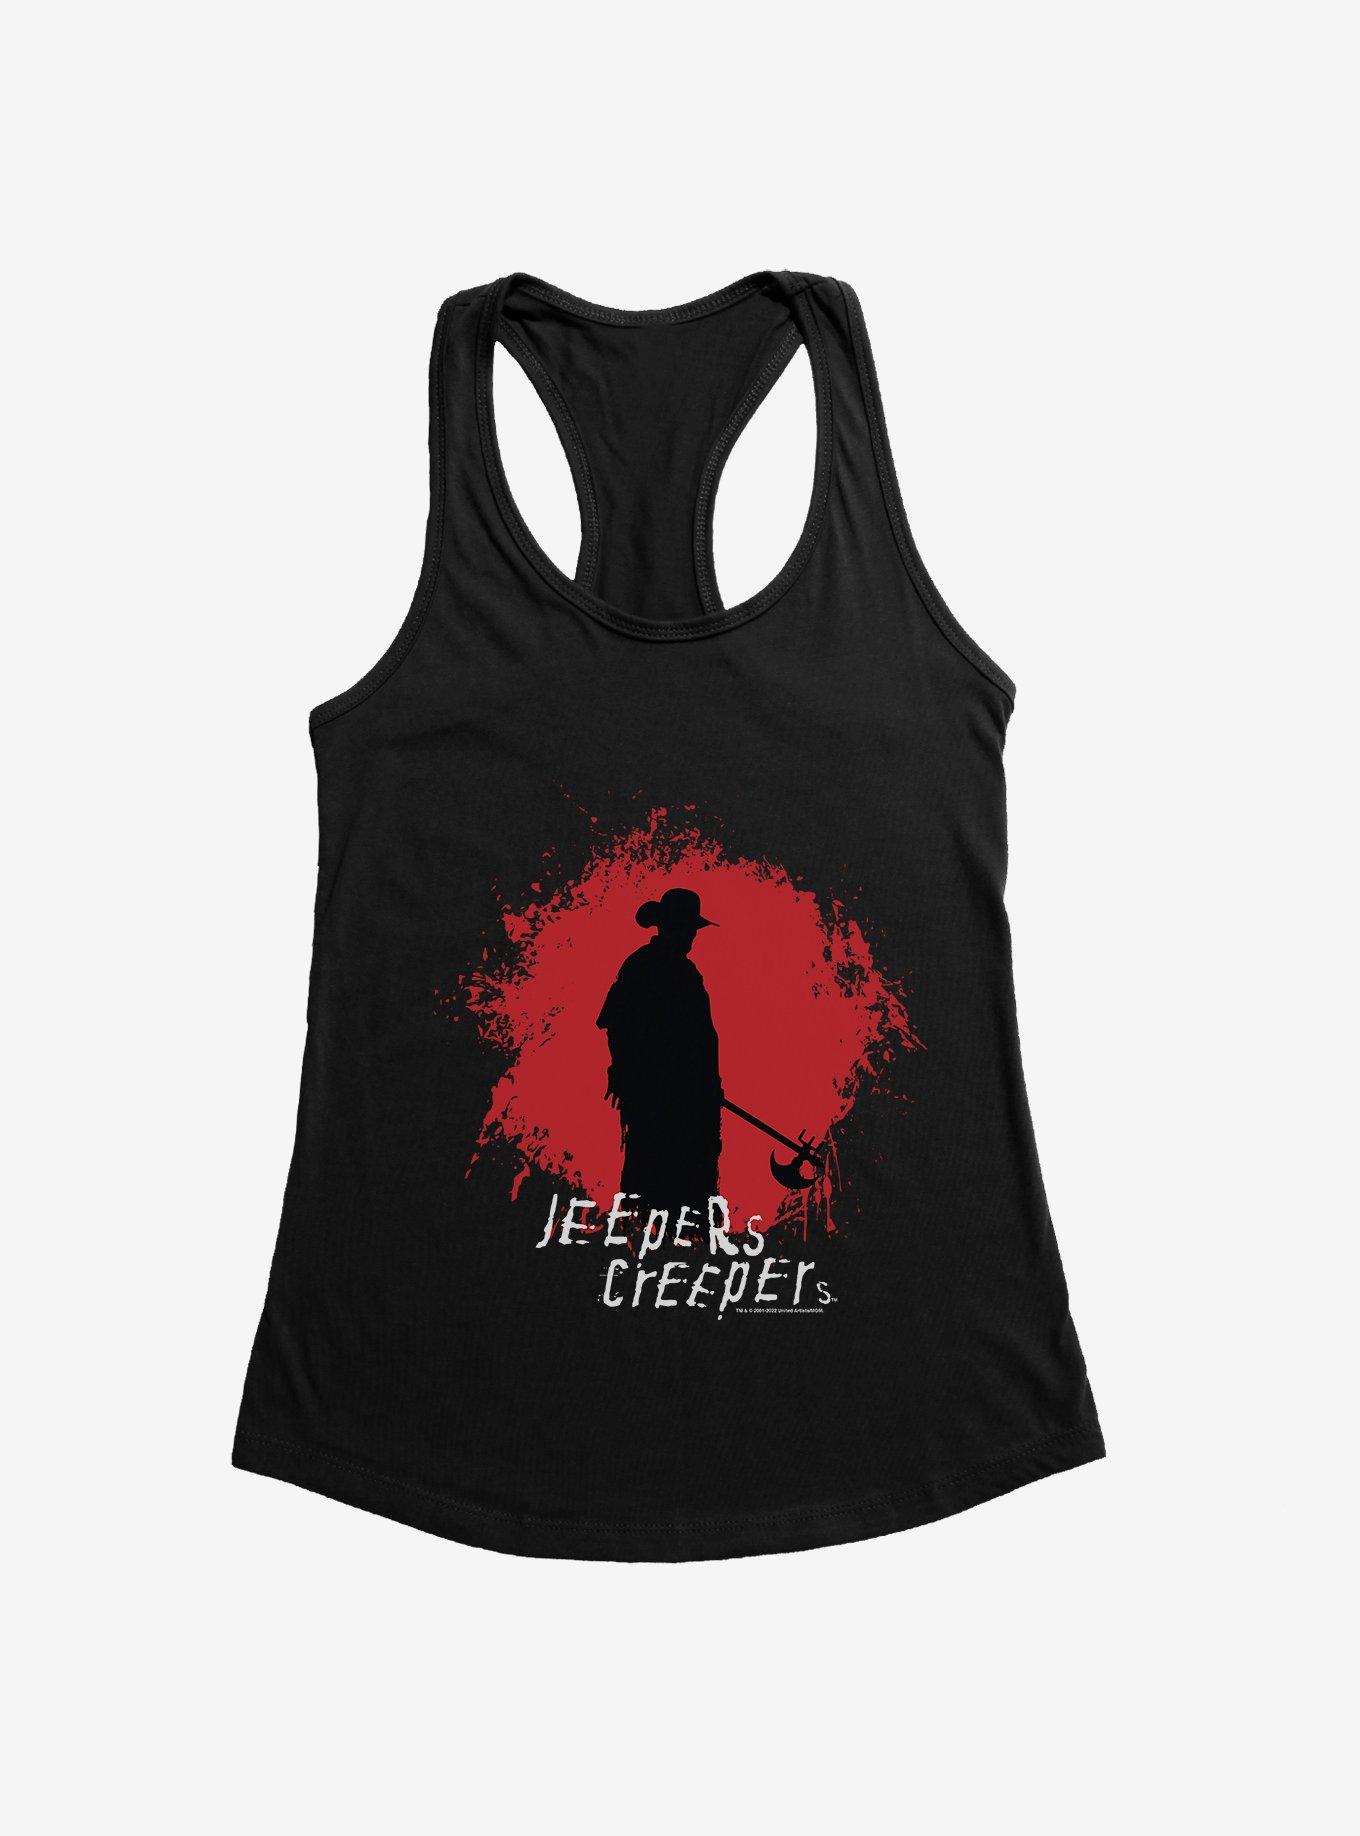 Jeepers Creepers The Creeper Girls Tank, BLACK, hi-res